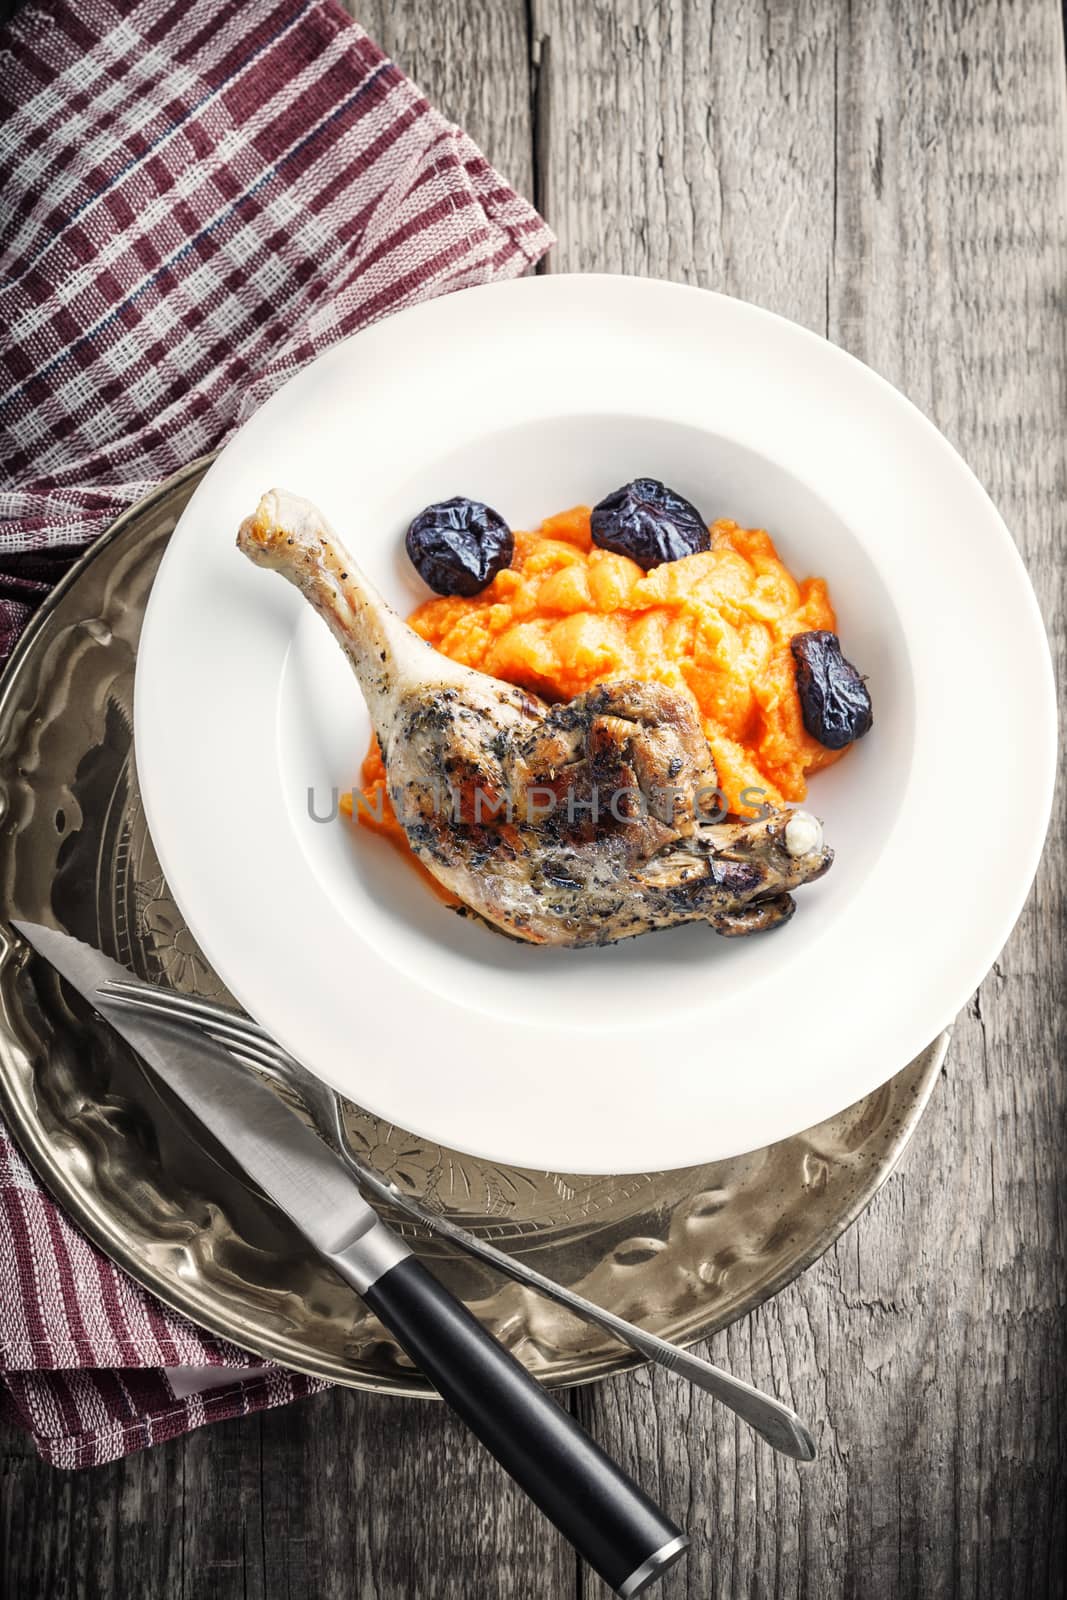 Roasted duck leg with mashed carrot and dried prunes by supercat67